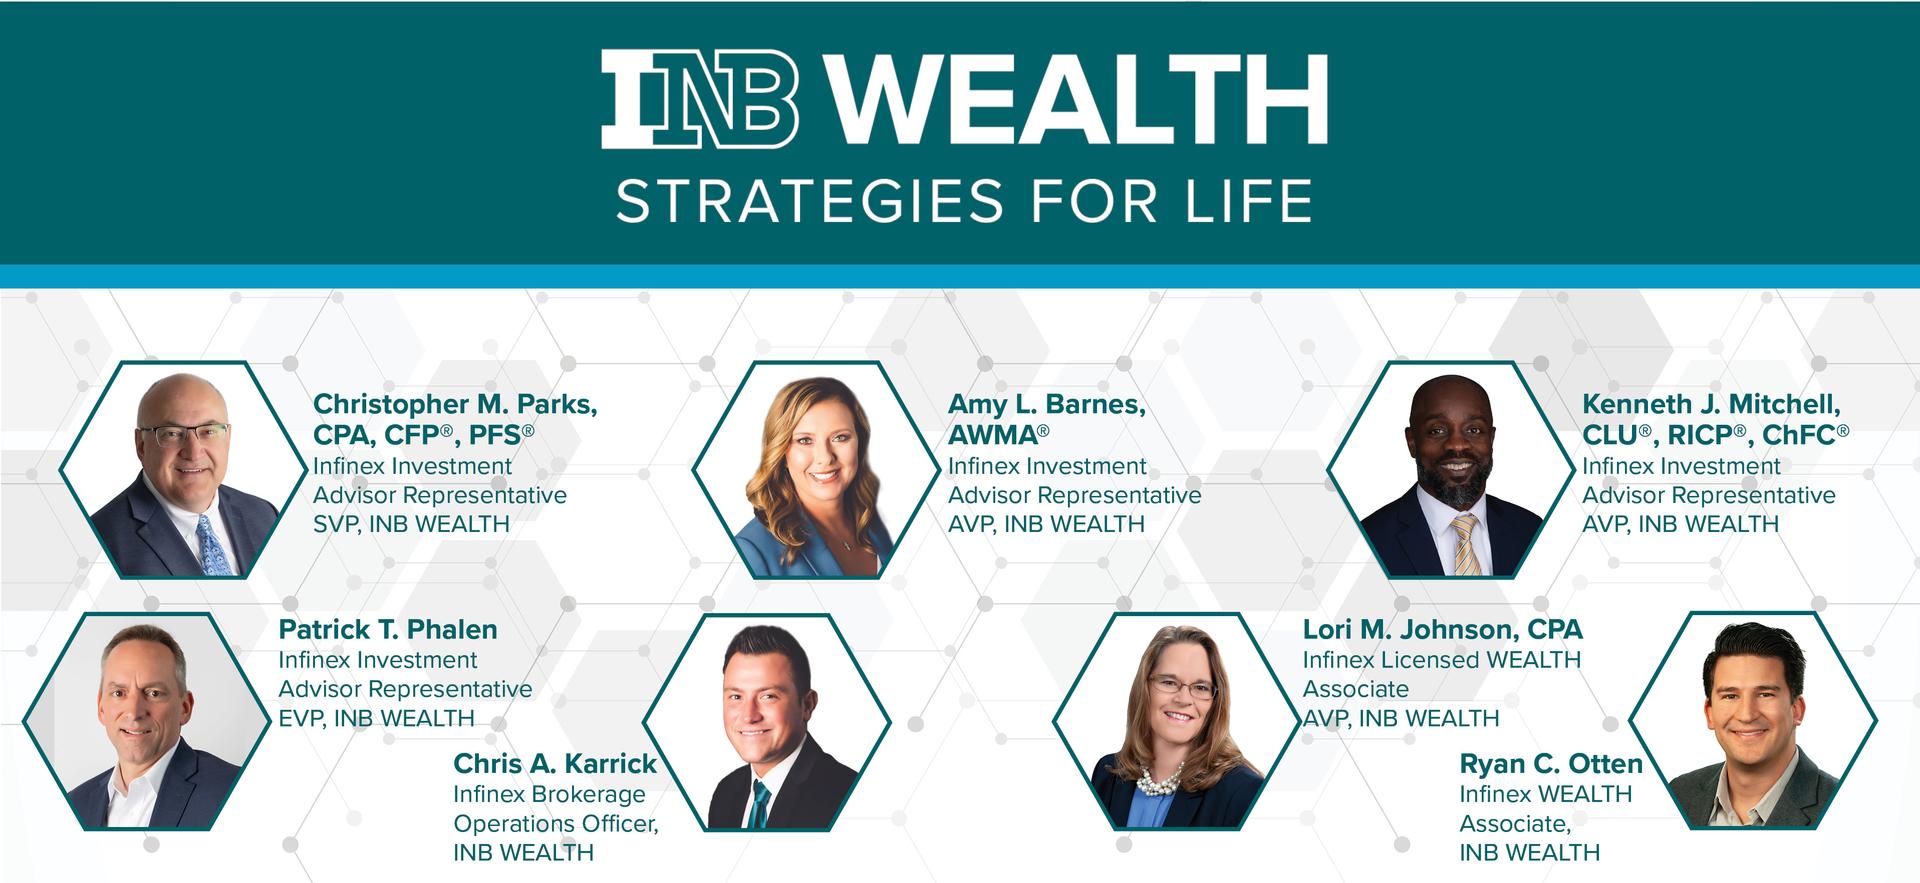 INB Wealth offers tailored strategies to help you fulfill your personal and business goals.